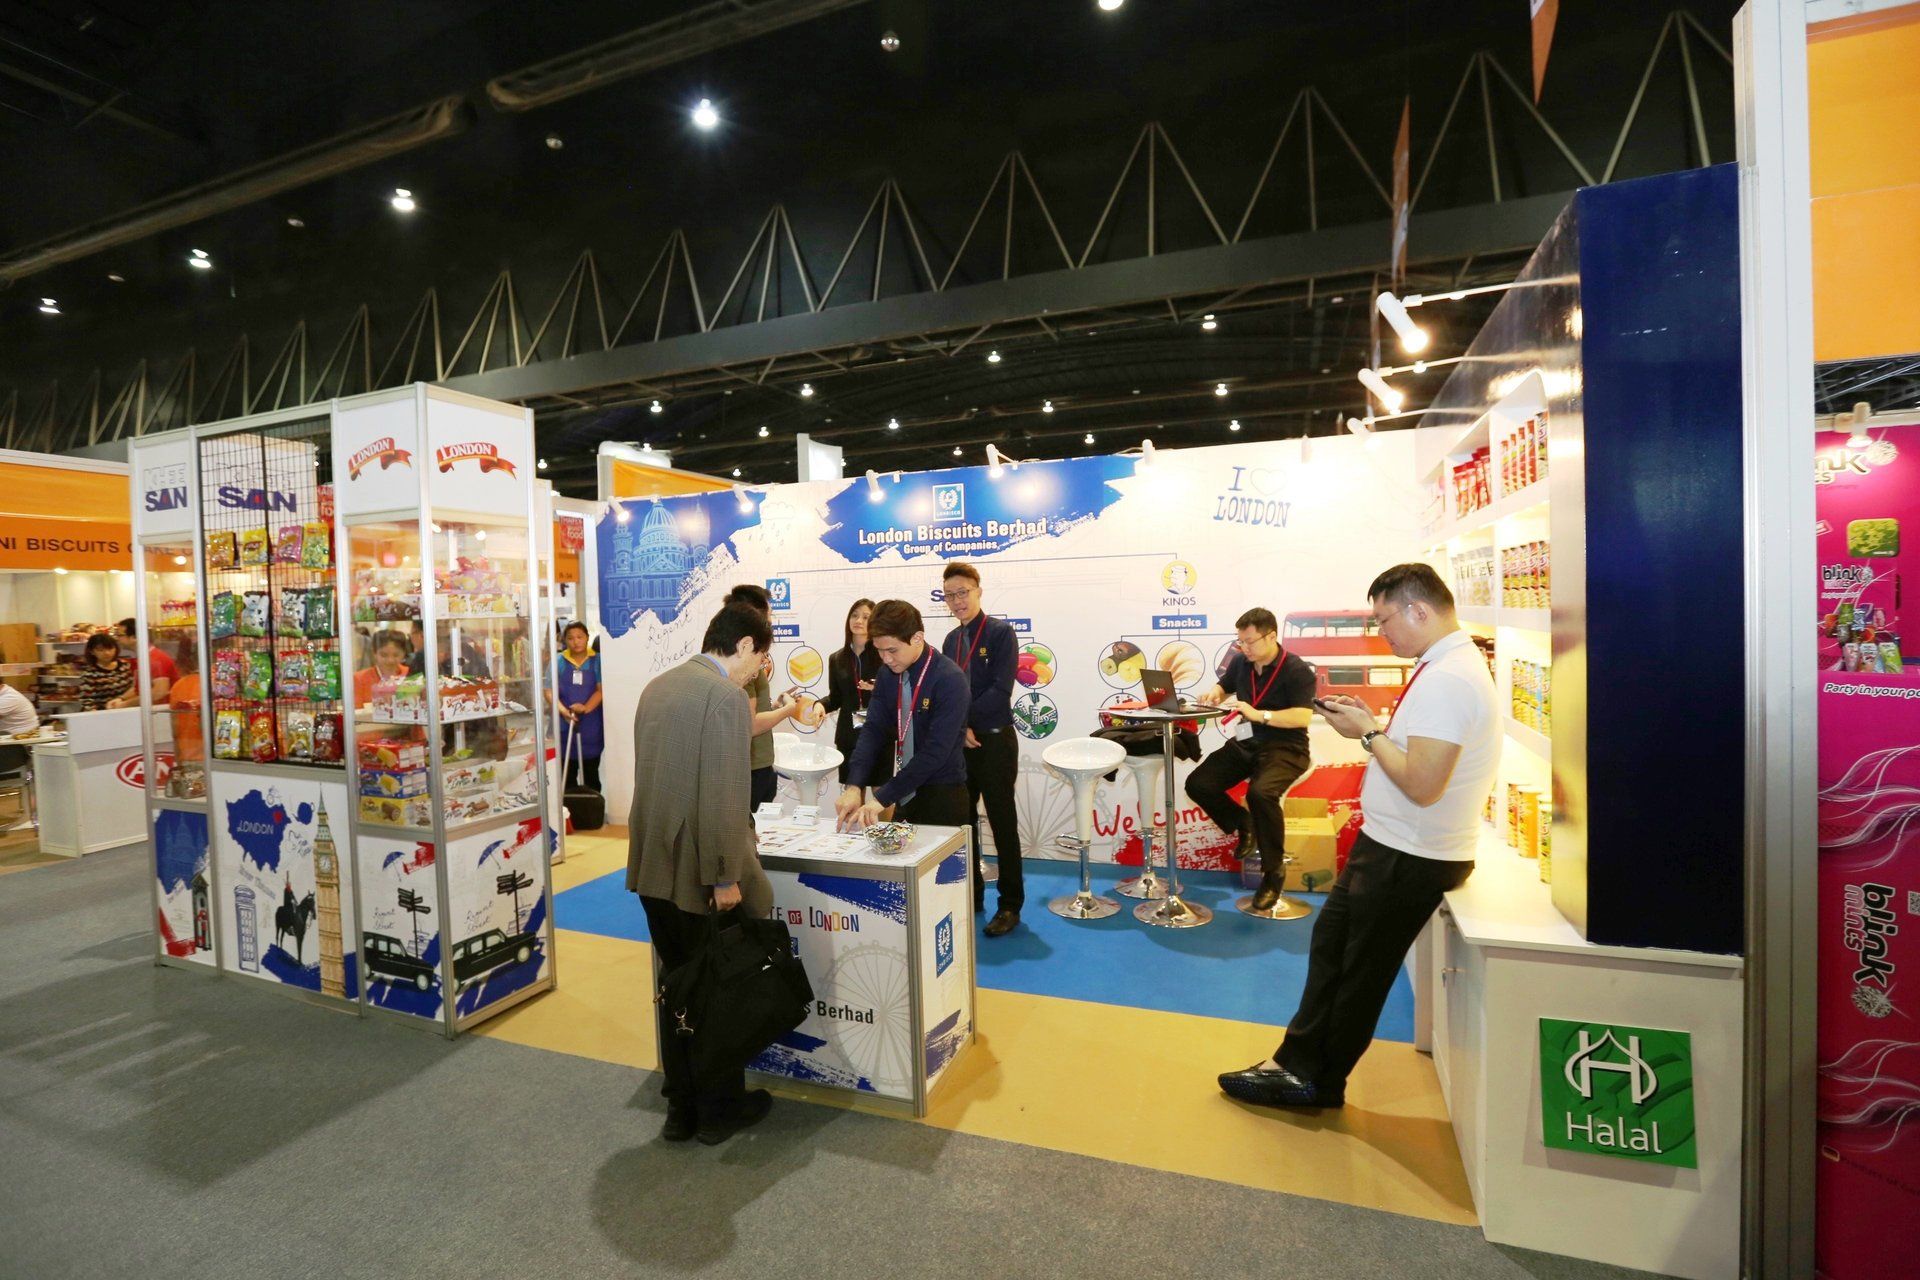 London Biscuits @ Thaifex 2014. Booth designed and built by Essential Global Fairs.